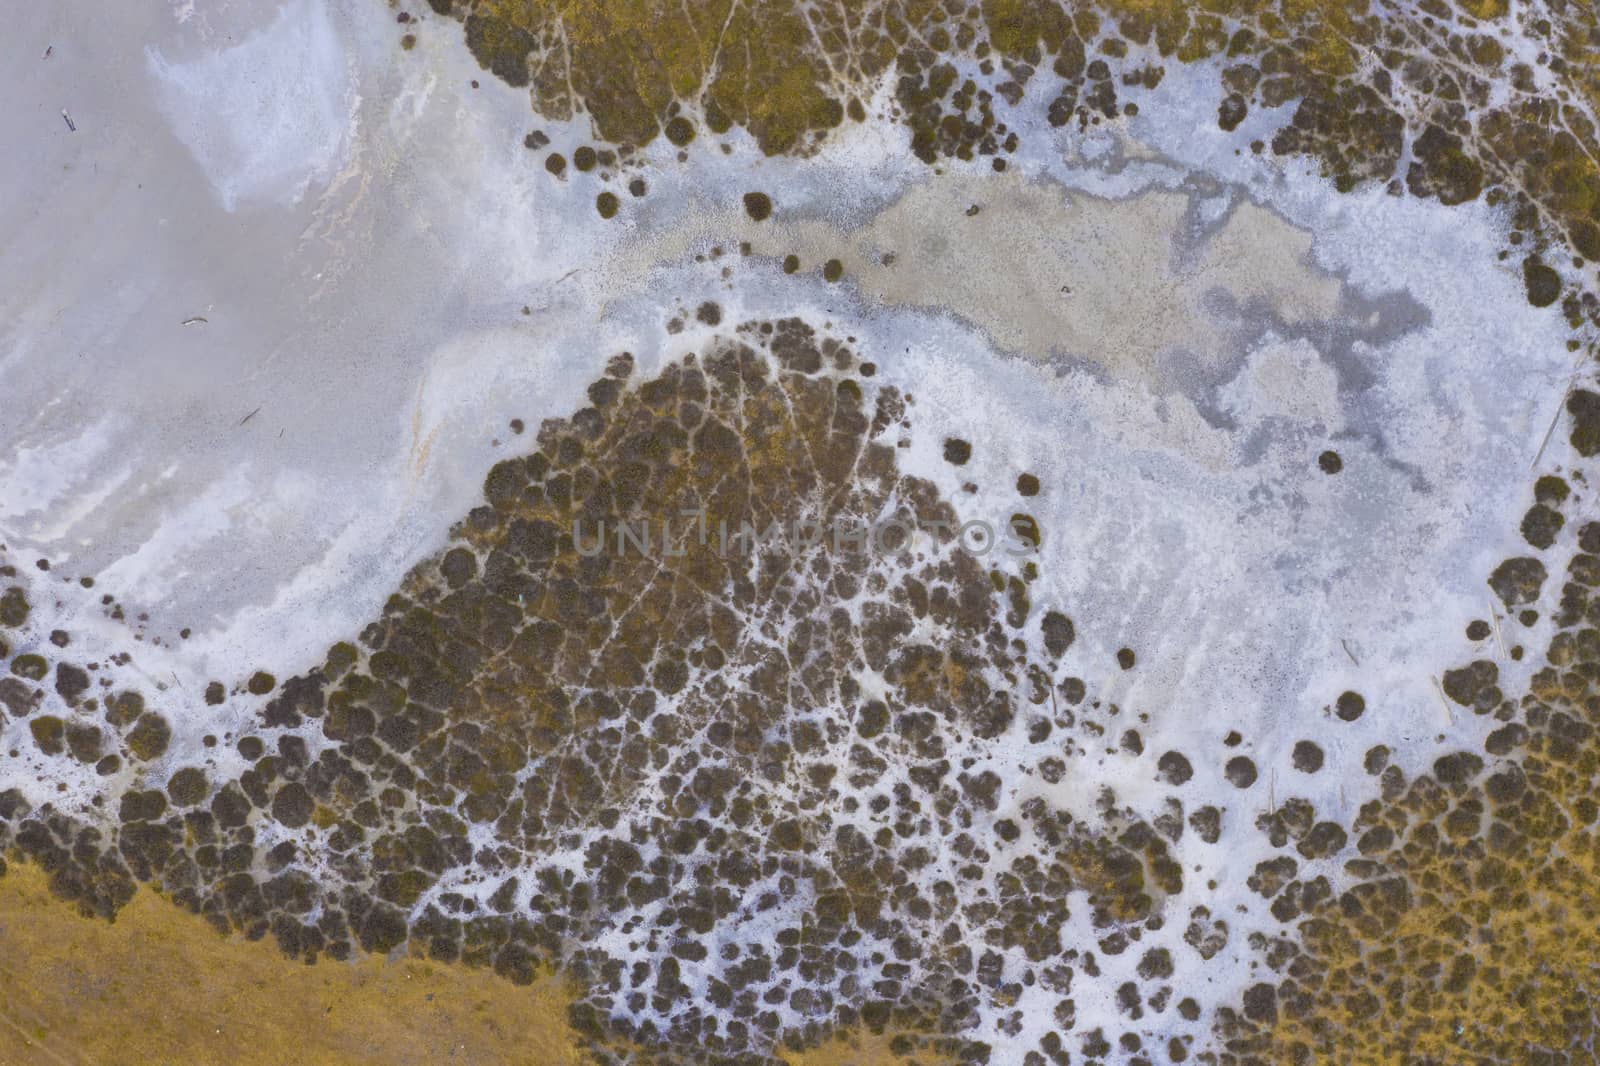 Aerial view of a water reservoir affected by drought in regional Australia by WittkePhotos